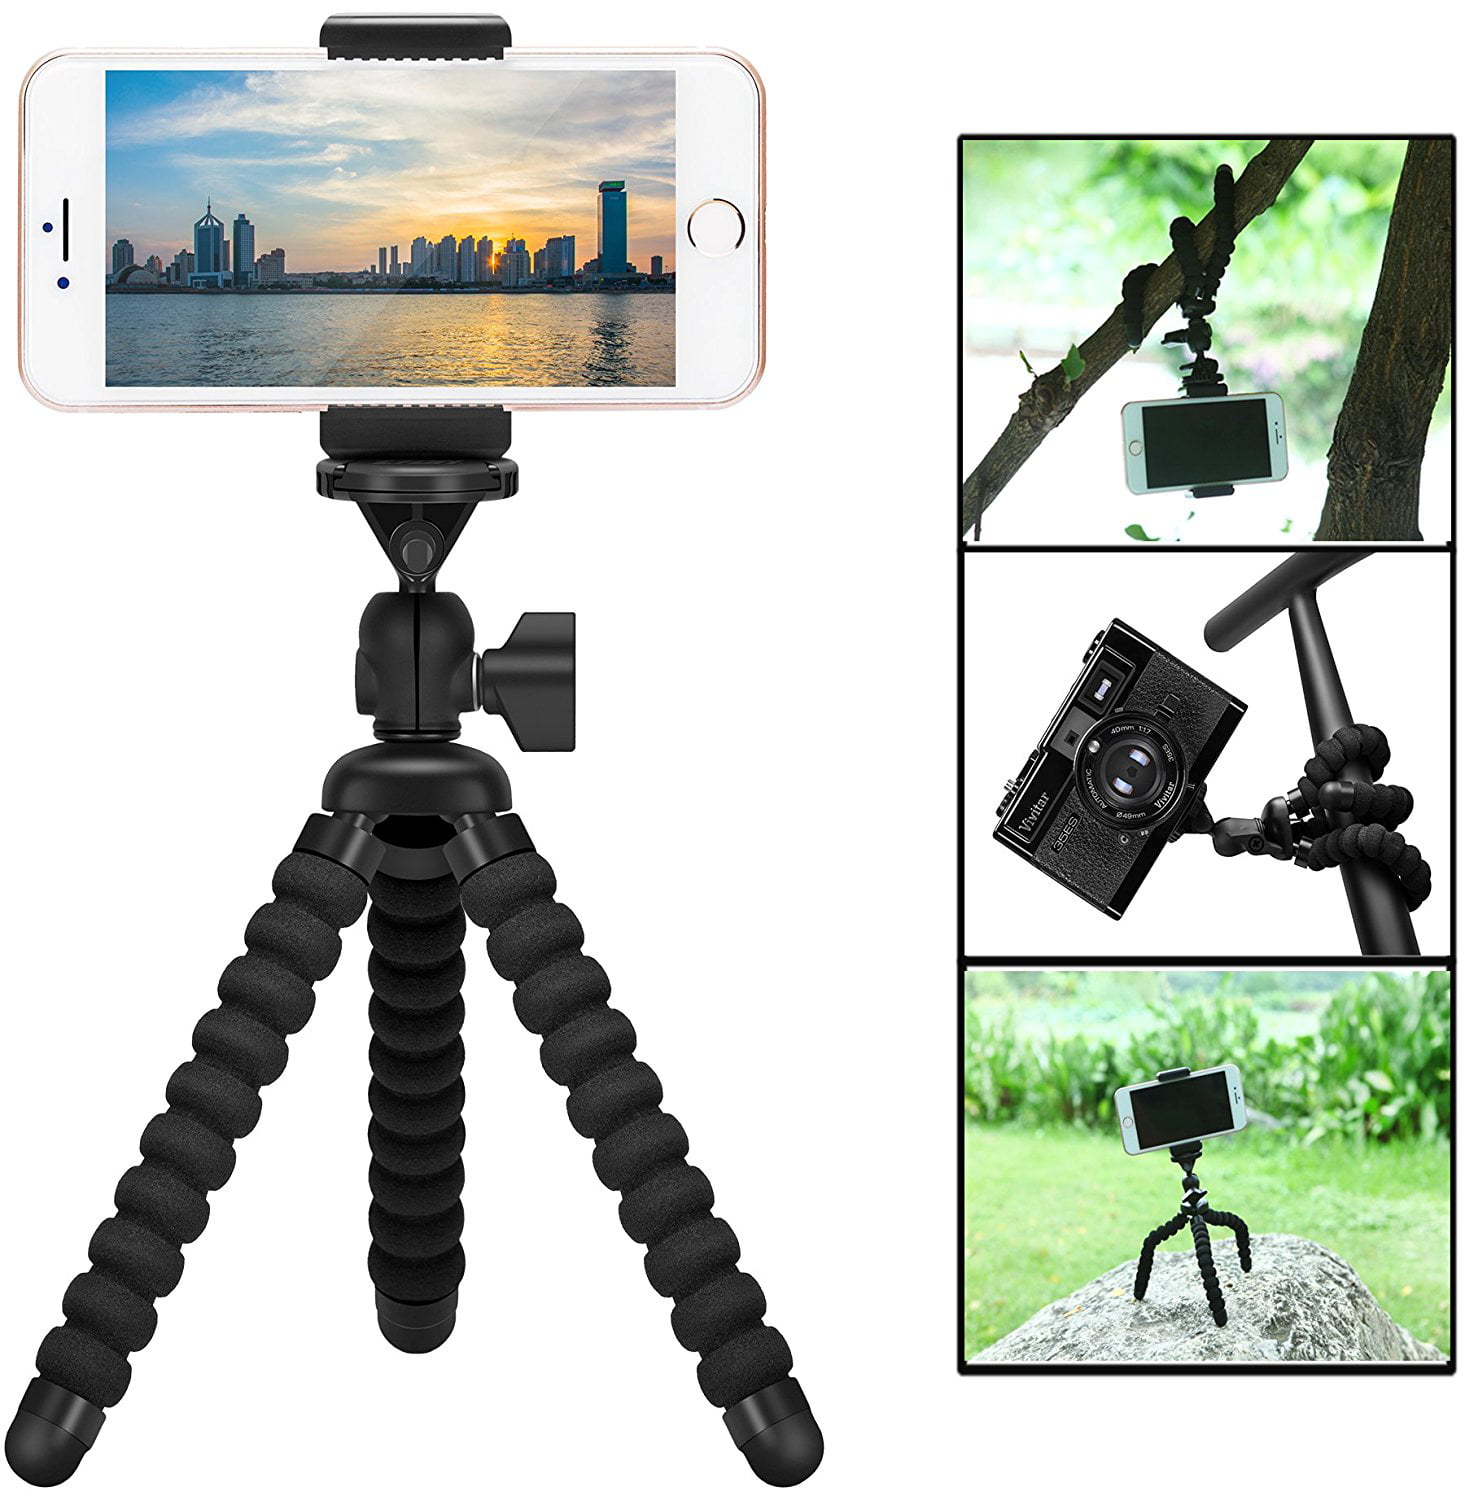 Universal Aluminum Mobile Phone Tripod Stand Grip Holder Mount For Camera iPhone 